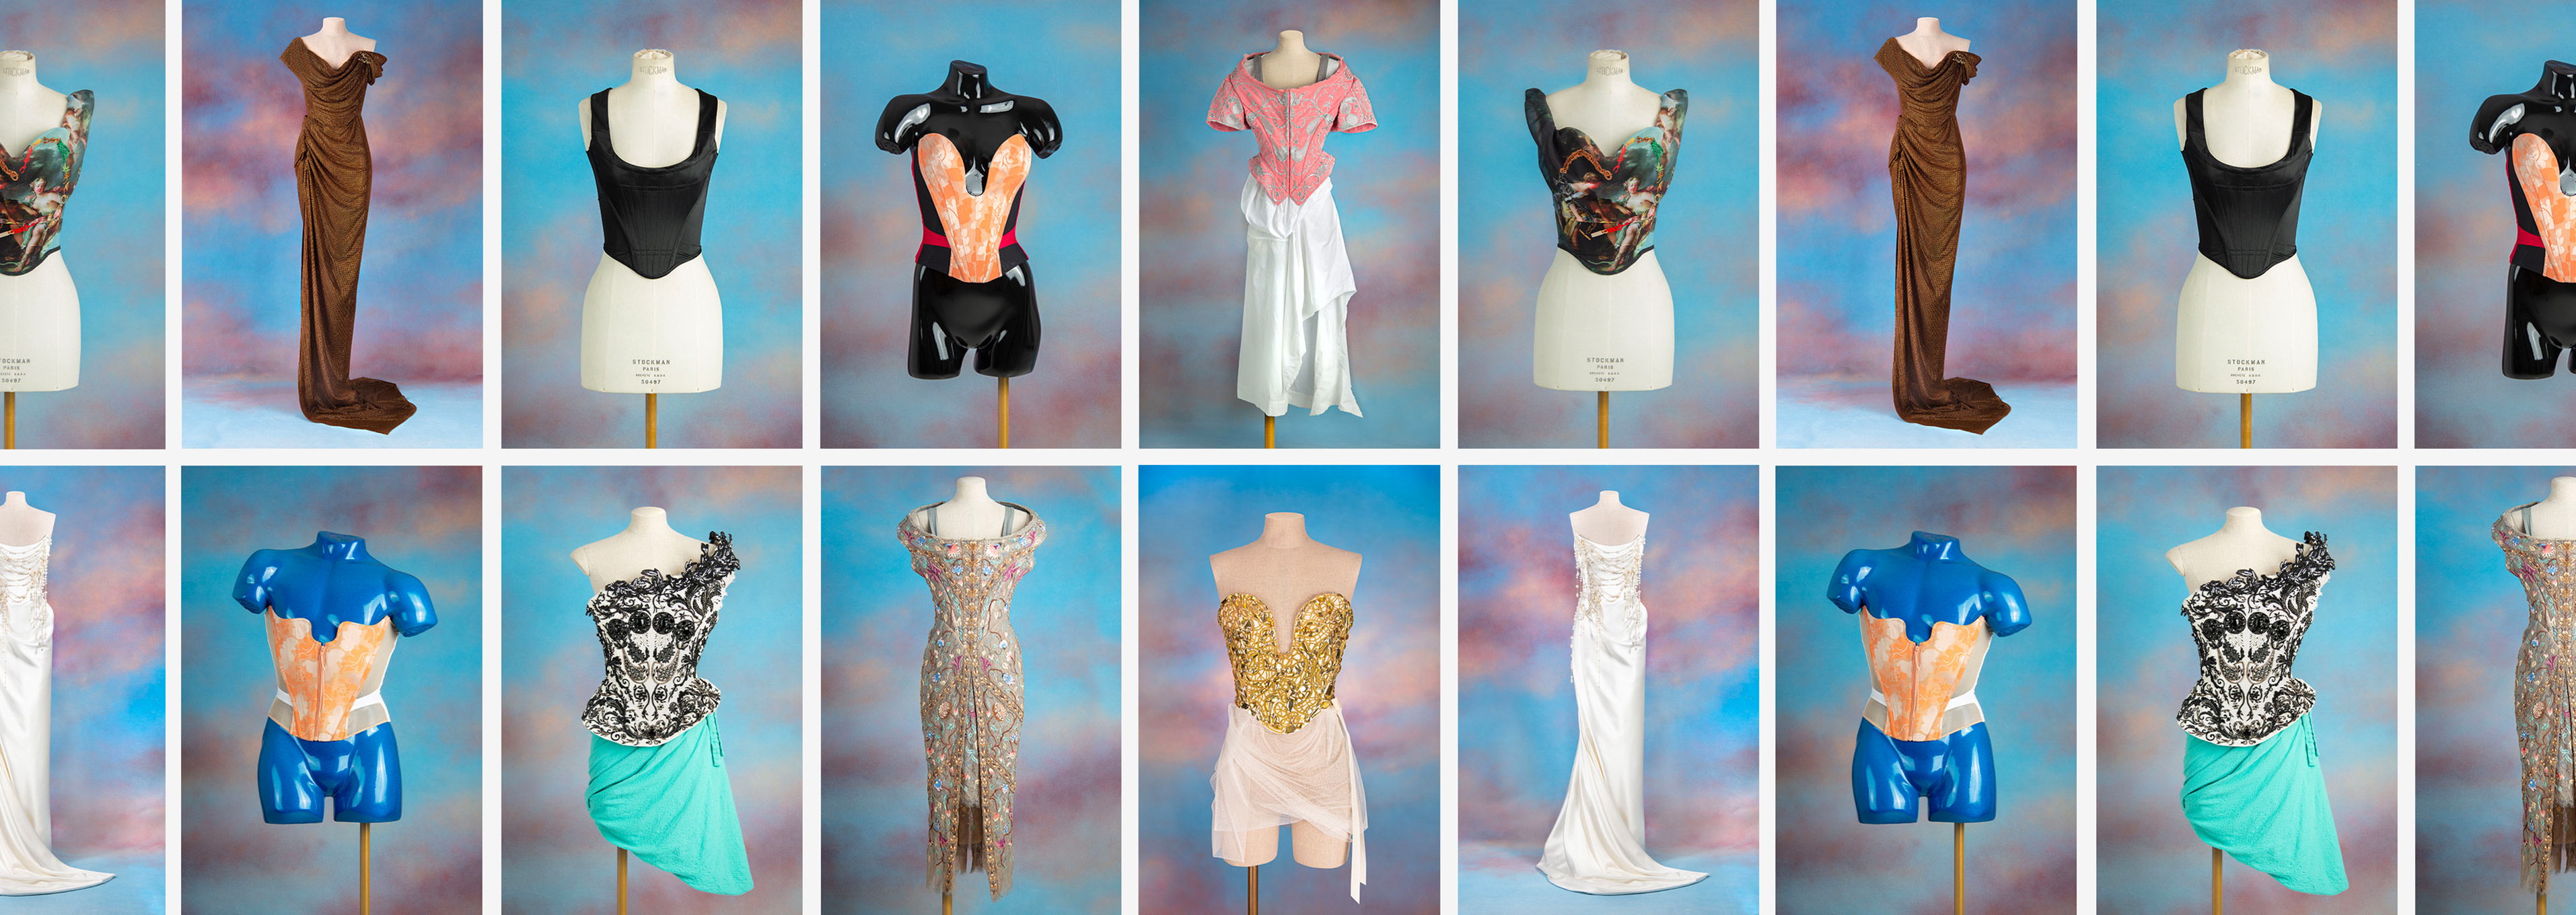 Vivienne Westwood Corsets – 1987 To Present Day